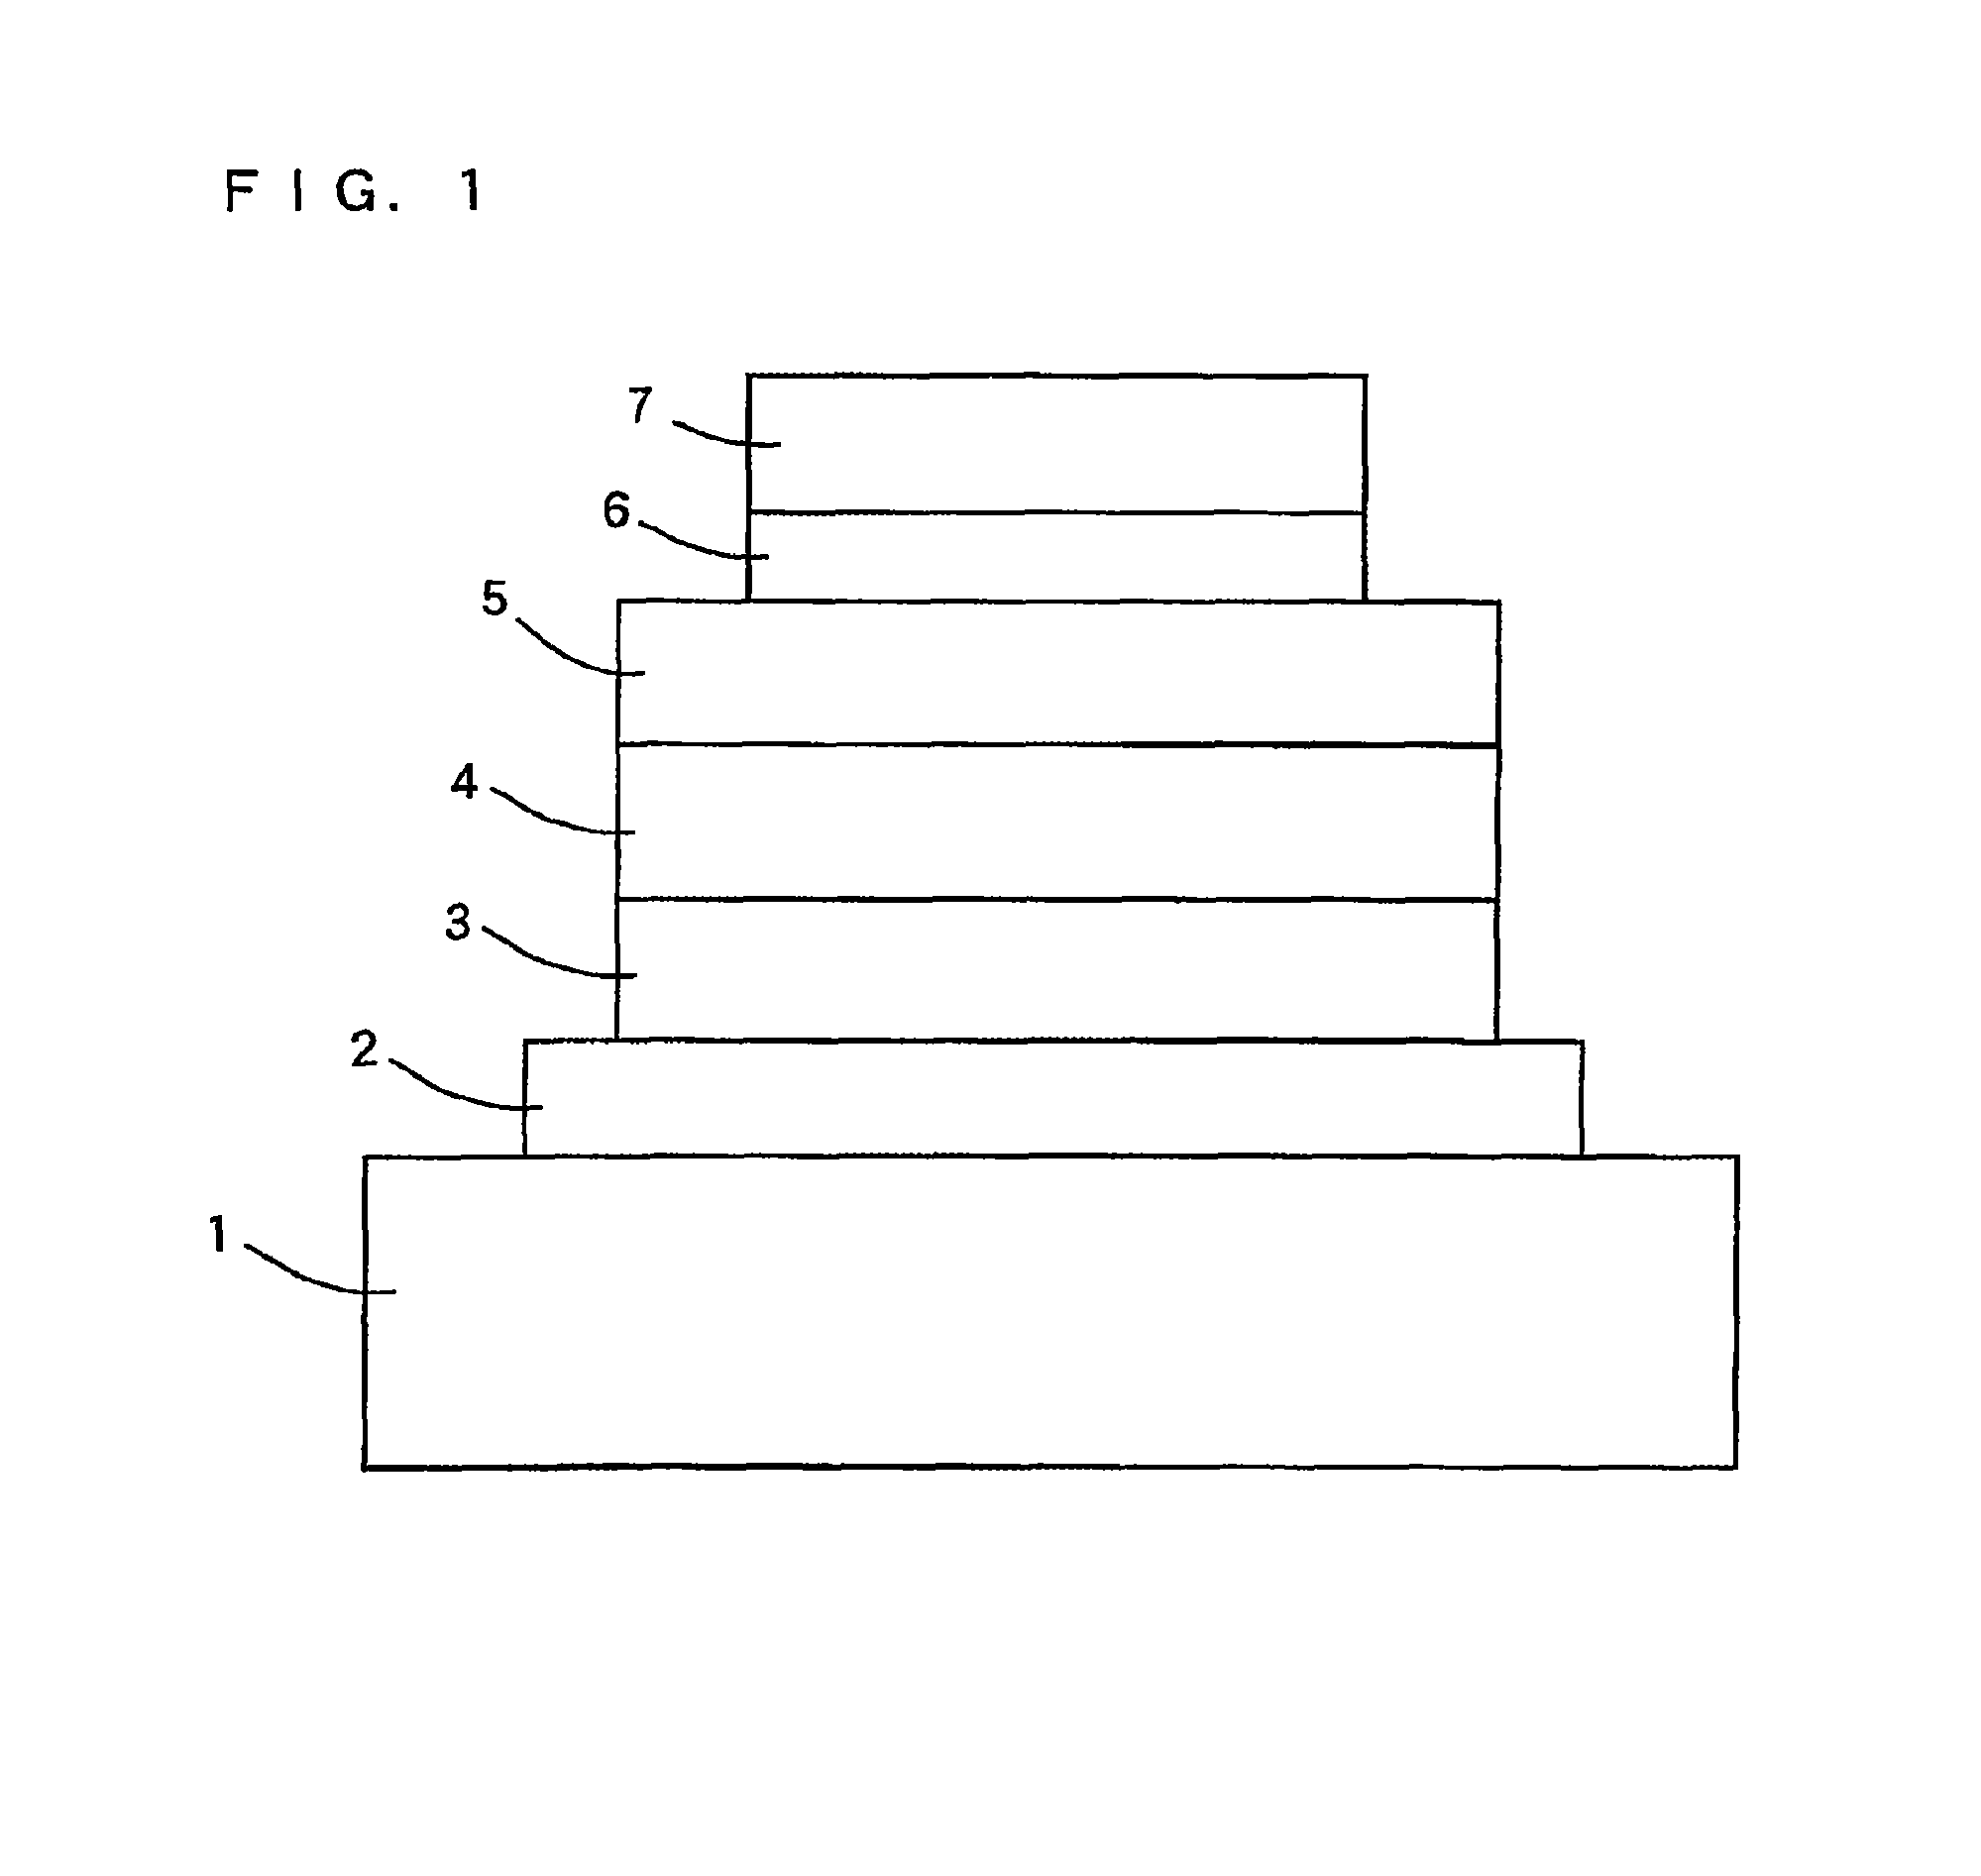 Organic electroluminescent device and method for manufacturing same